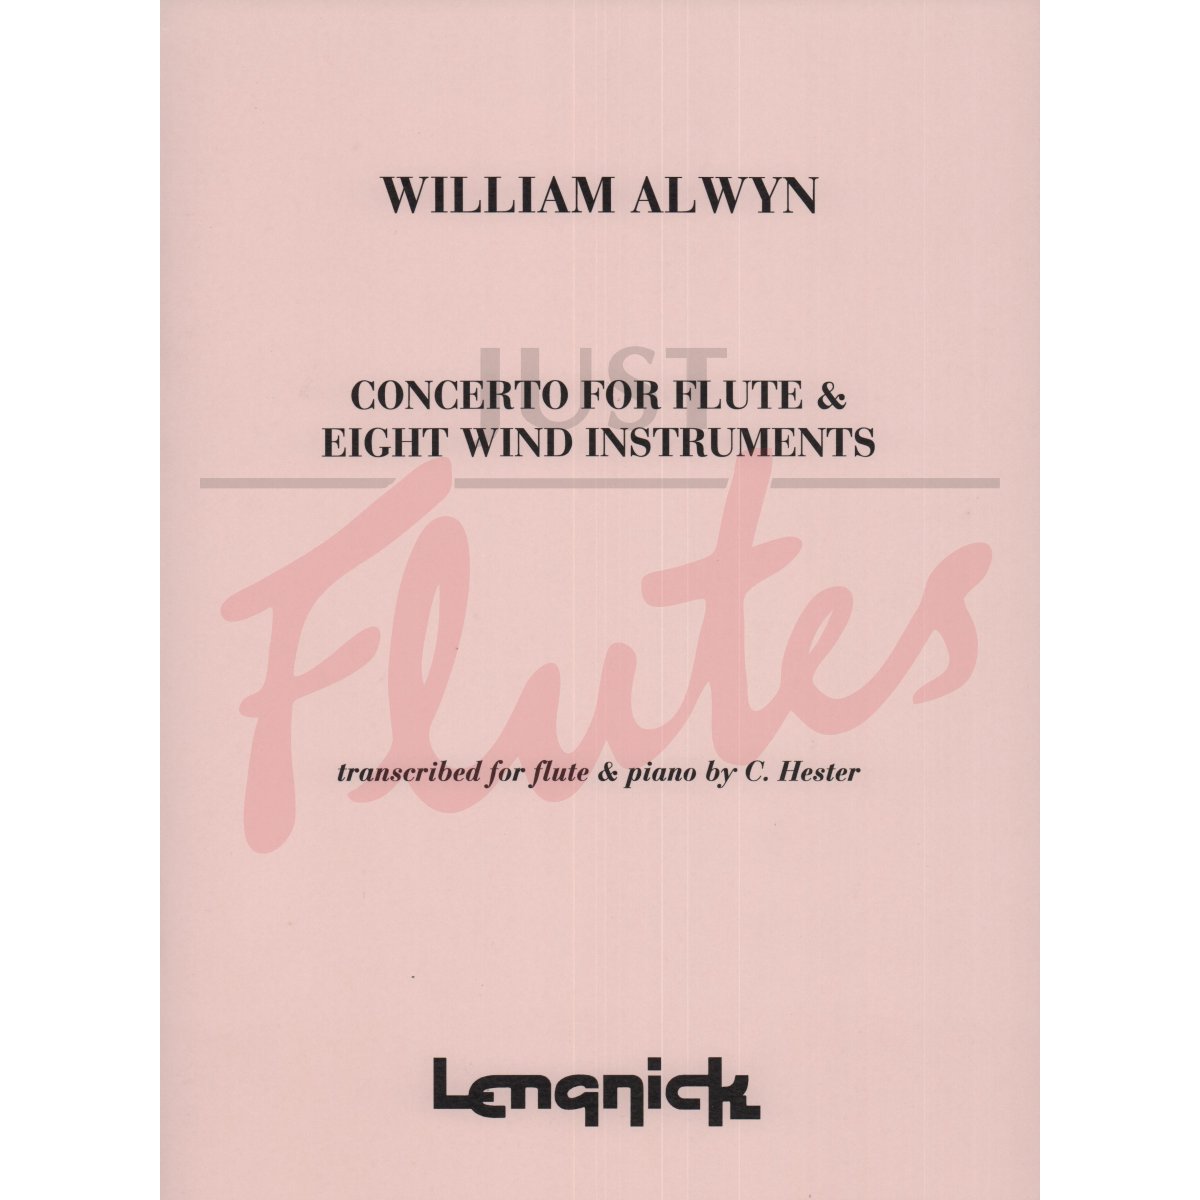 Concerto for Flute &amp; Eight Wind Instruments, transcribed for Flute and Piano